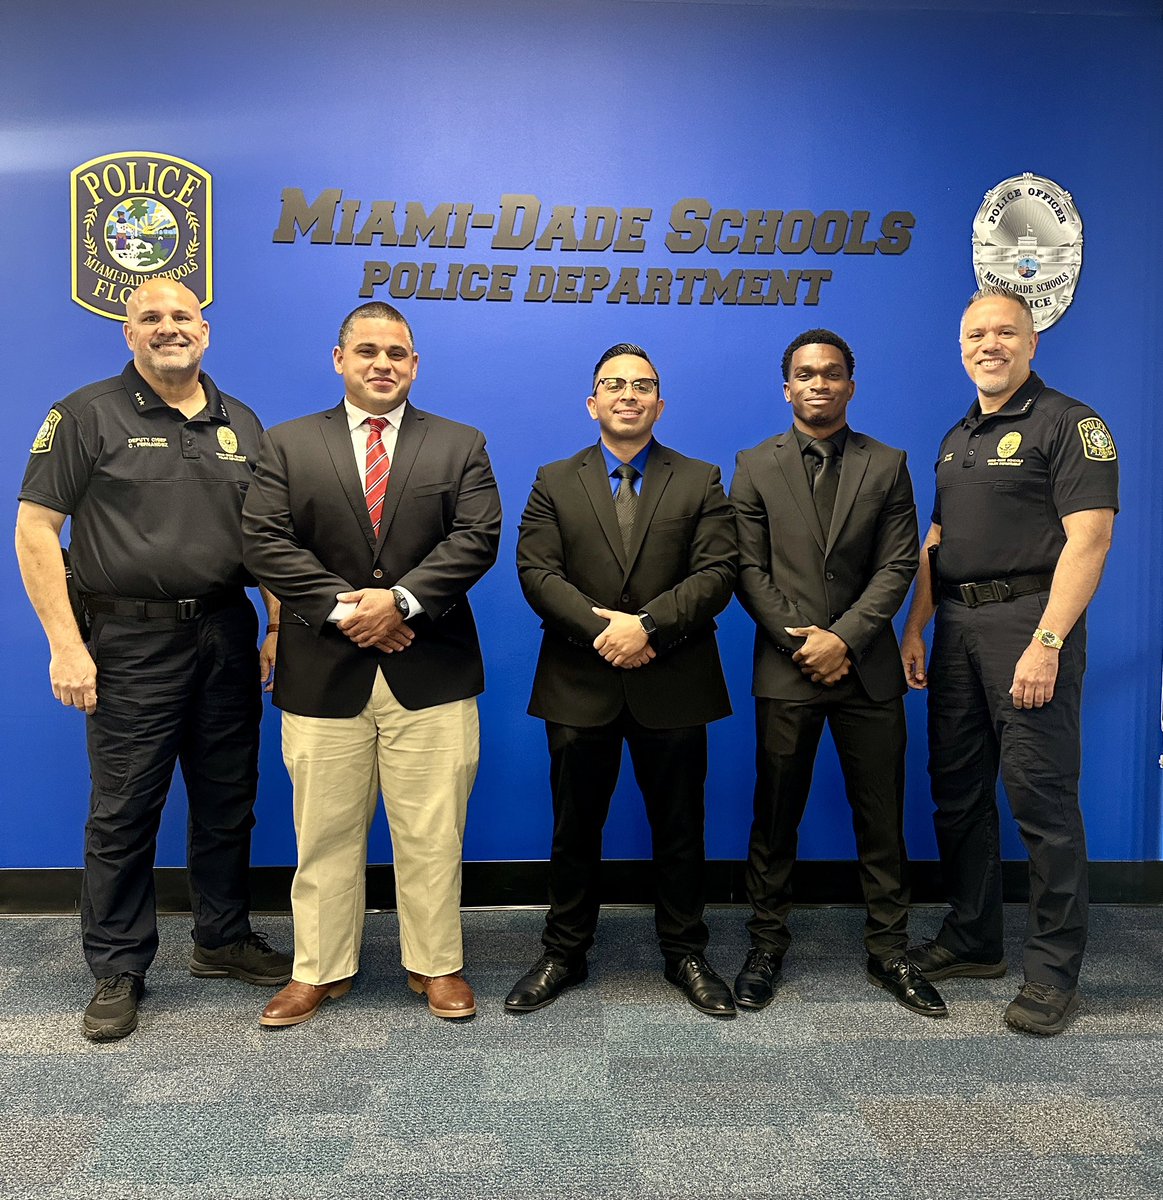 Thrilled to welcome three certified officers to our family! As they begin their FTO phases, we're gearing up to deploy them to our schools, ensuring safety and security for all. #YourBestChoiceMDCPS #protectingourfuture @SuptDotres @MDCPS